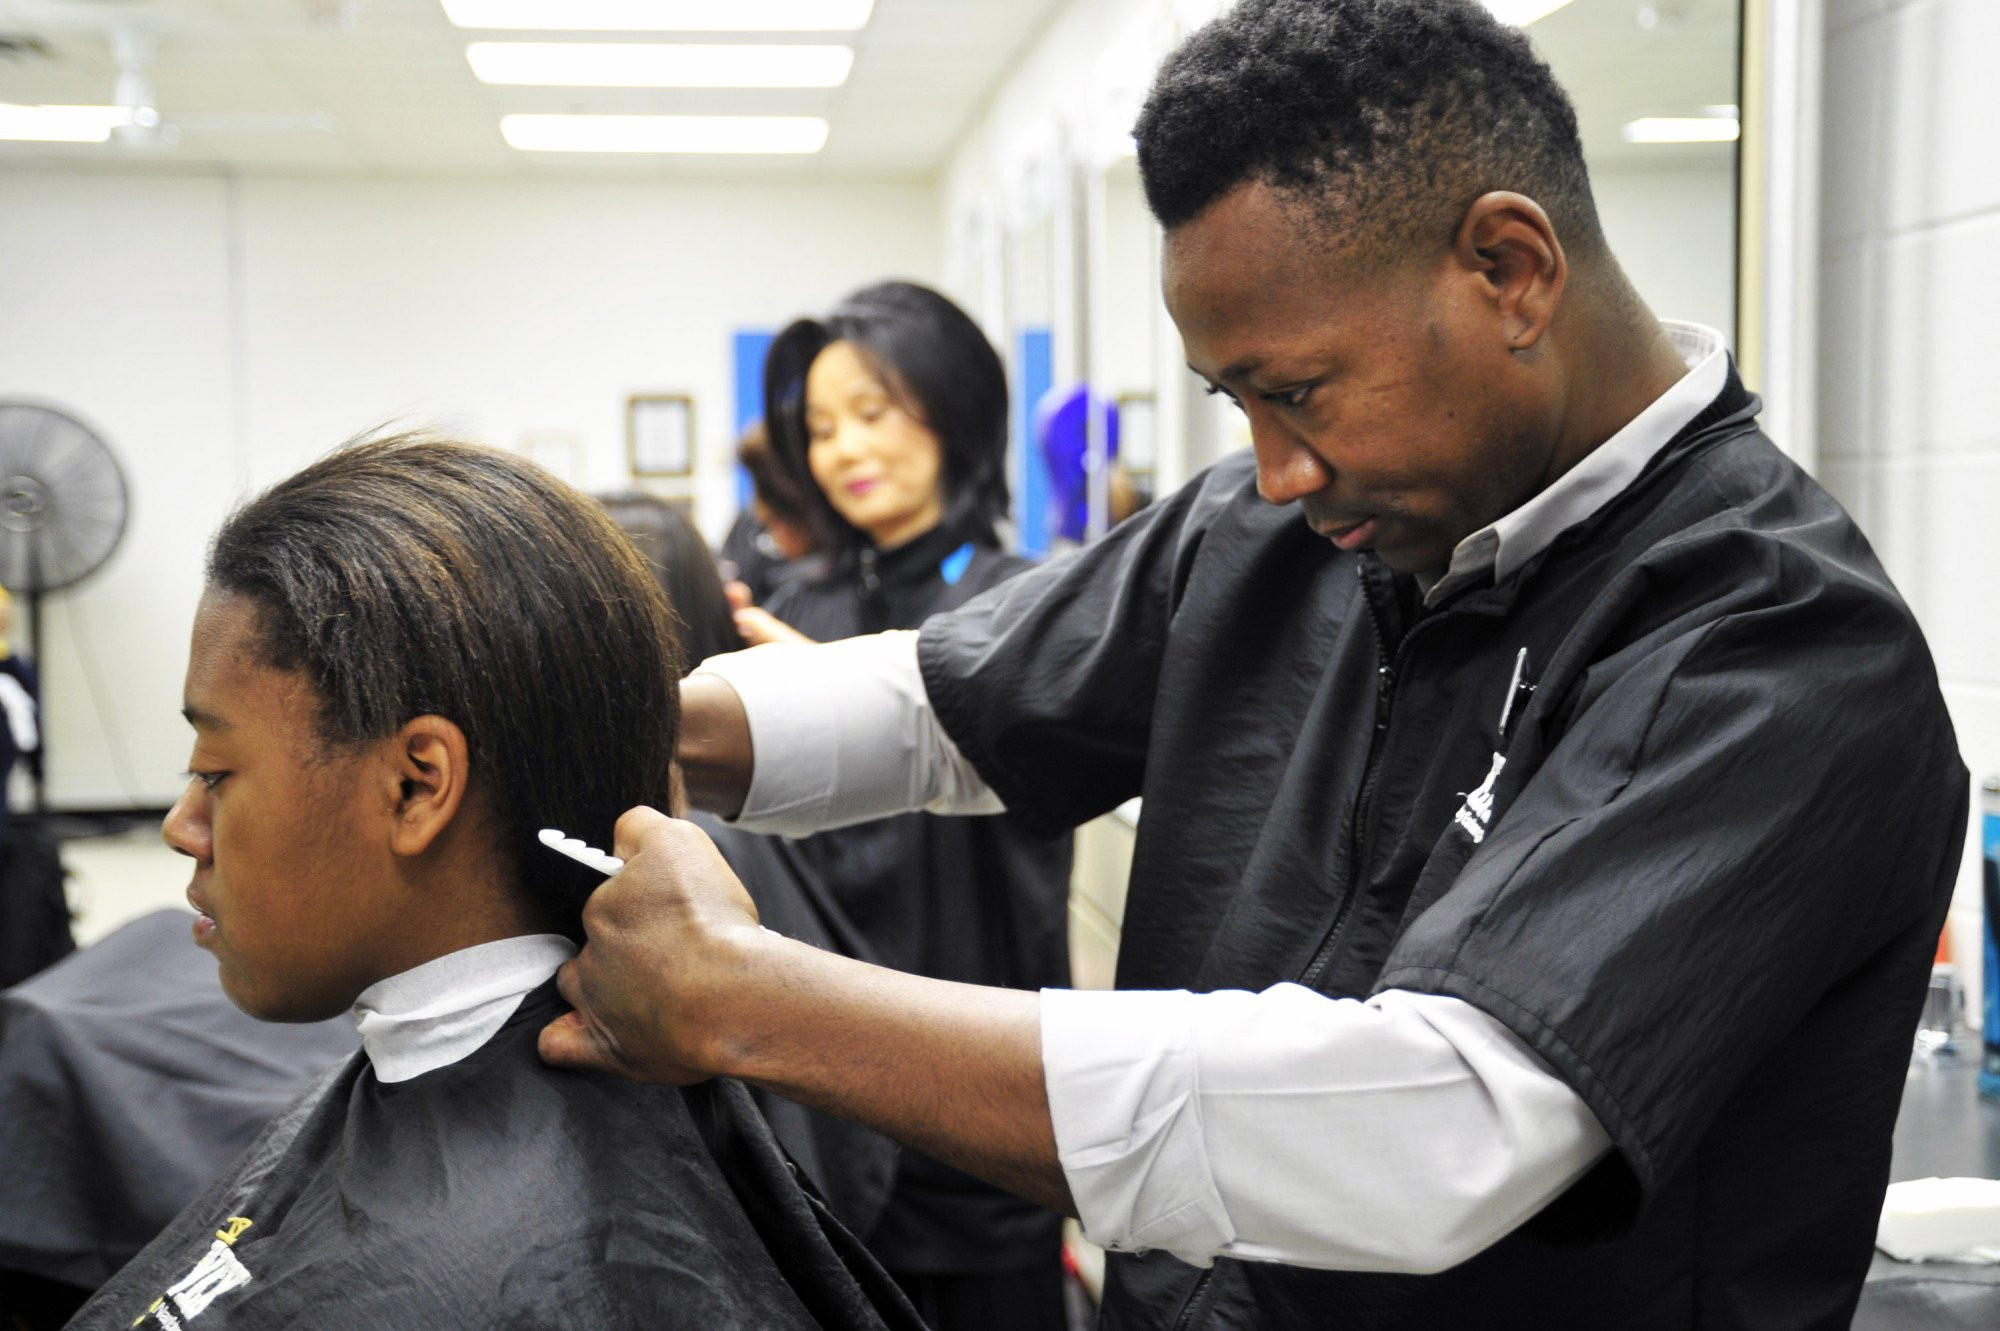 Female Navy Haircuts
 Navy test may end mandatory haircuts for female recruits